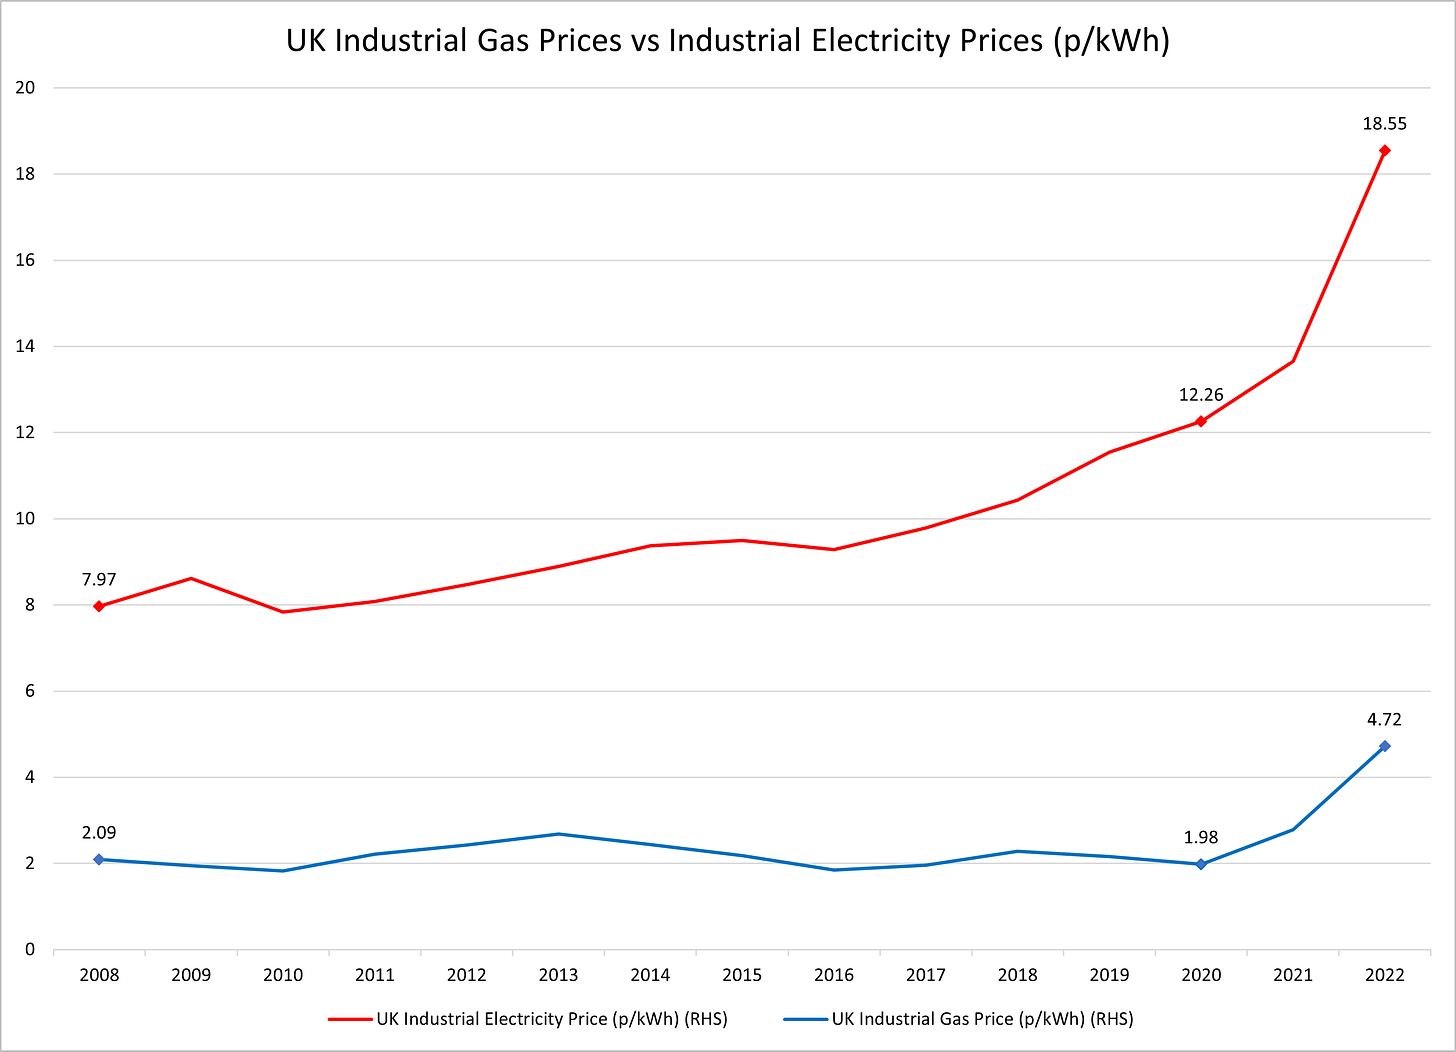 Figure 4 - UK Industrial Gas and Electricity Prices 2008-2022 (p per kWh)